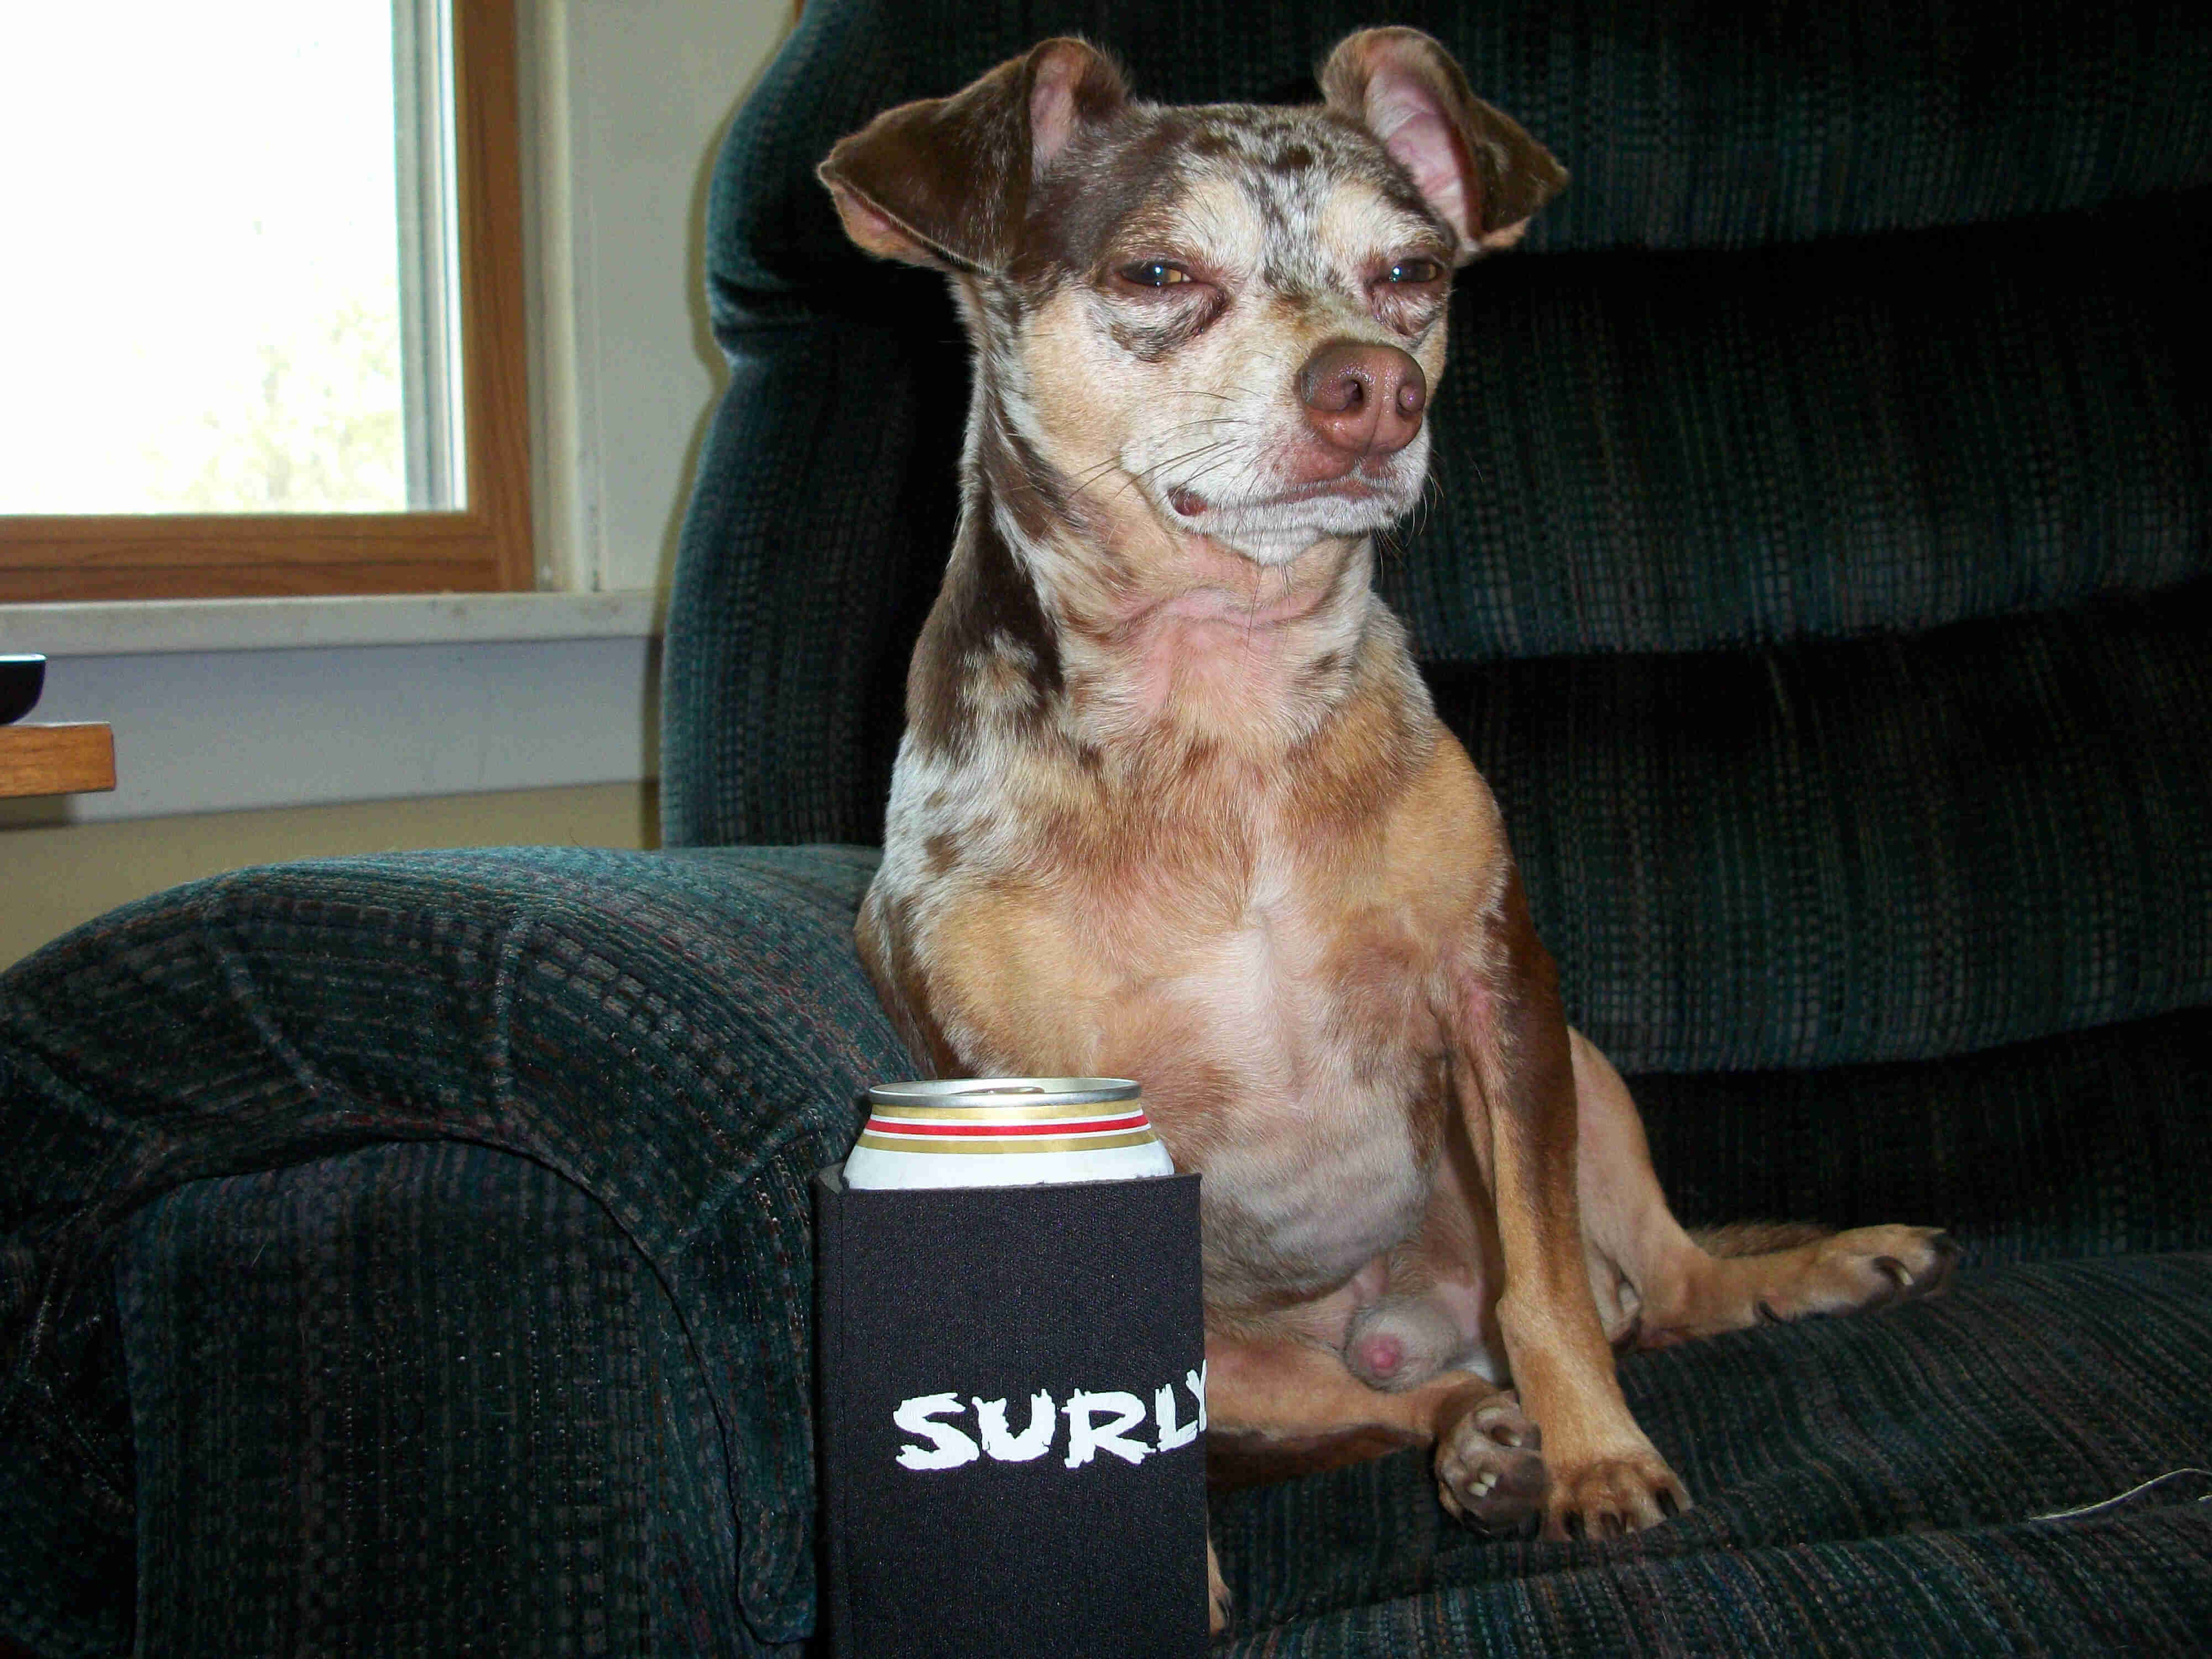 Front view of a dog, sitting on a green recliner chair, behind a black can cooler with a Surly bikes logo and can inside